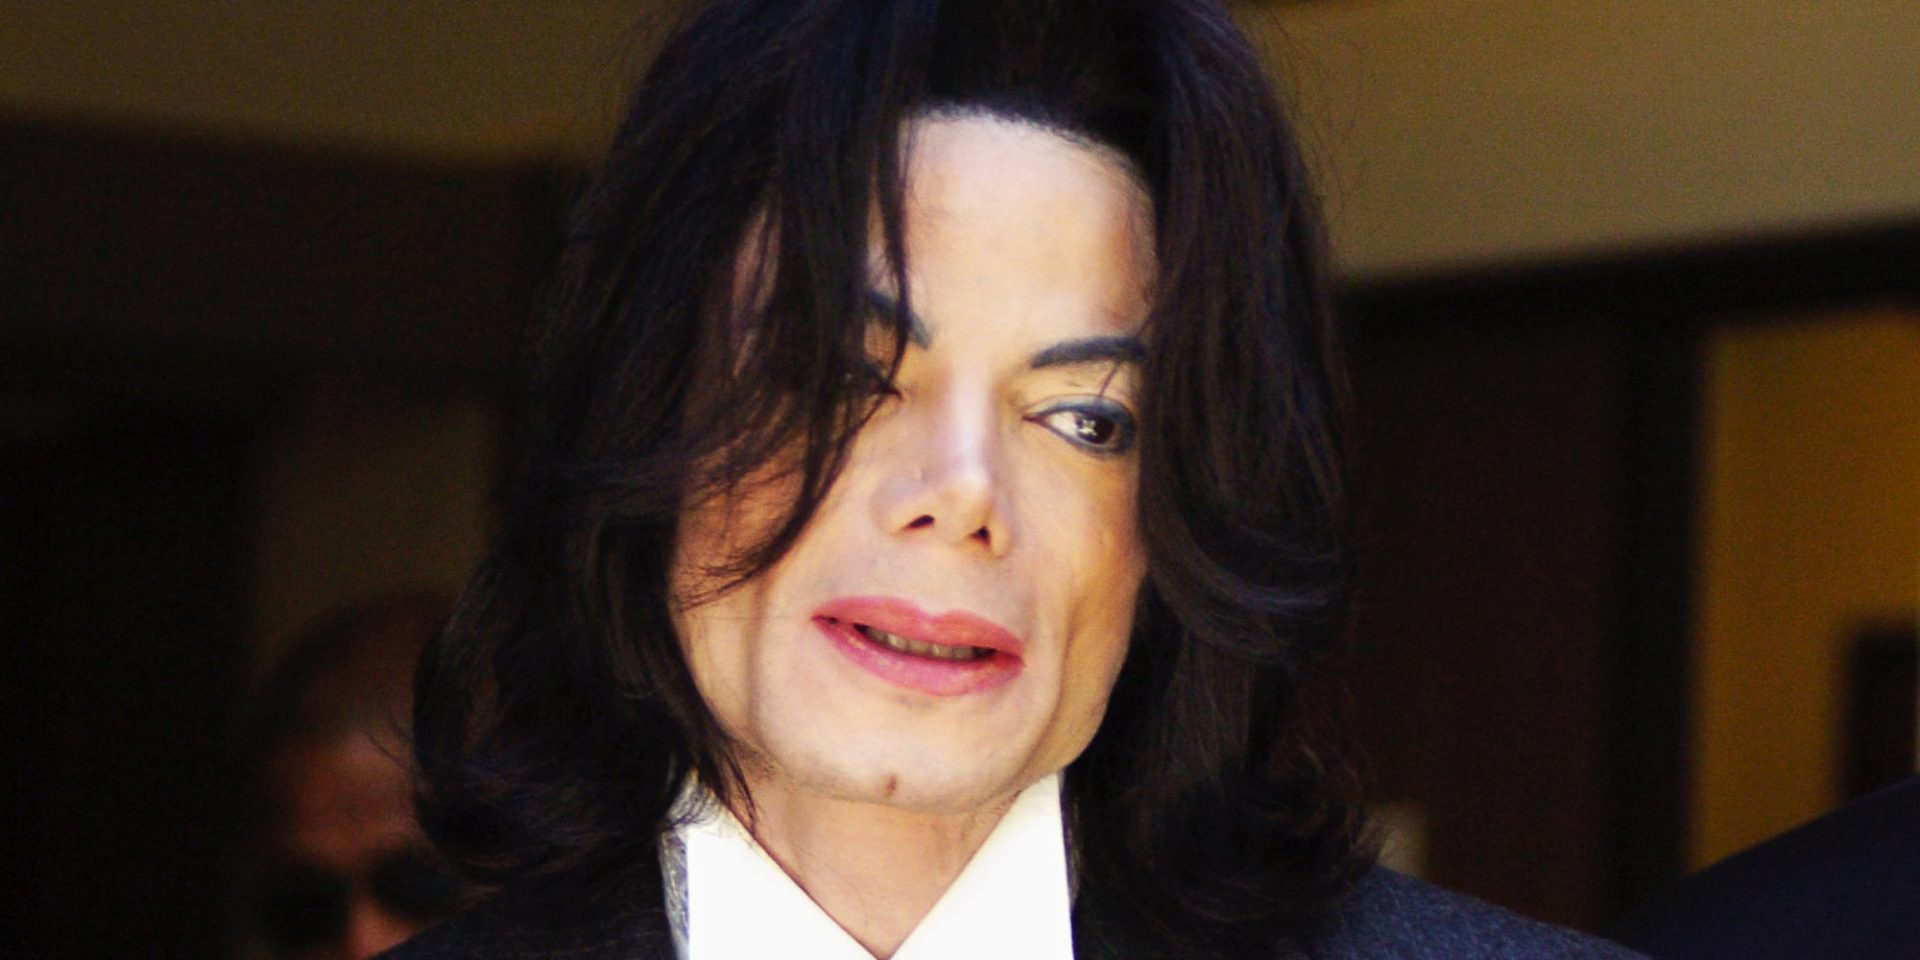 SANTA MARIA, CA - MAY 23:  Michael Jackson smiles as he leaves the Santa Barbara County Courthouse after a day of his child molestation trial May 23, 2005 in Santa Maria, California. Jackson is charged in a 10-count indictment that included molesting a boy, plying him with liquor and conspiring to commit child abduction, false imprisonment and extortion. He has pleaded innocent. (Photo by Phil Klein-Pool/Getty Images)